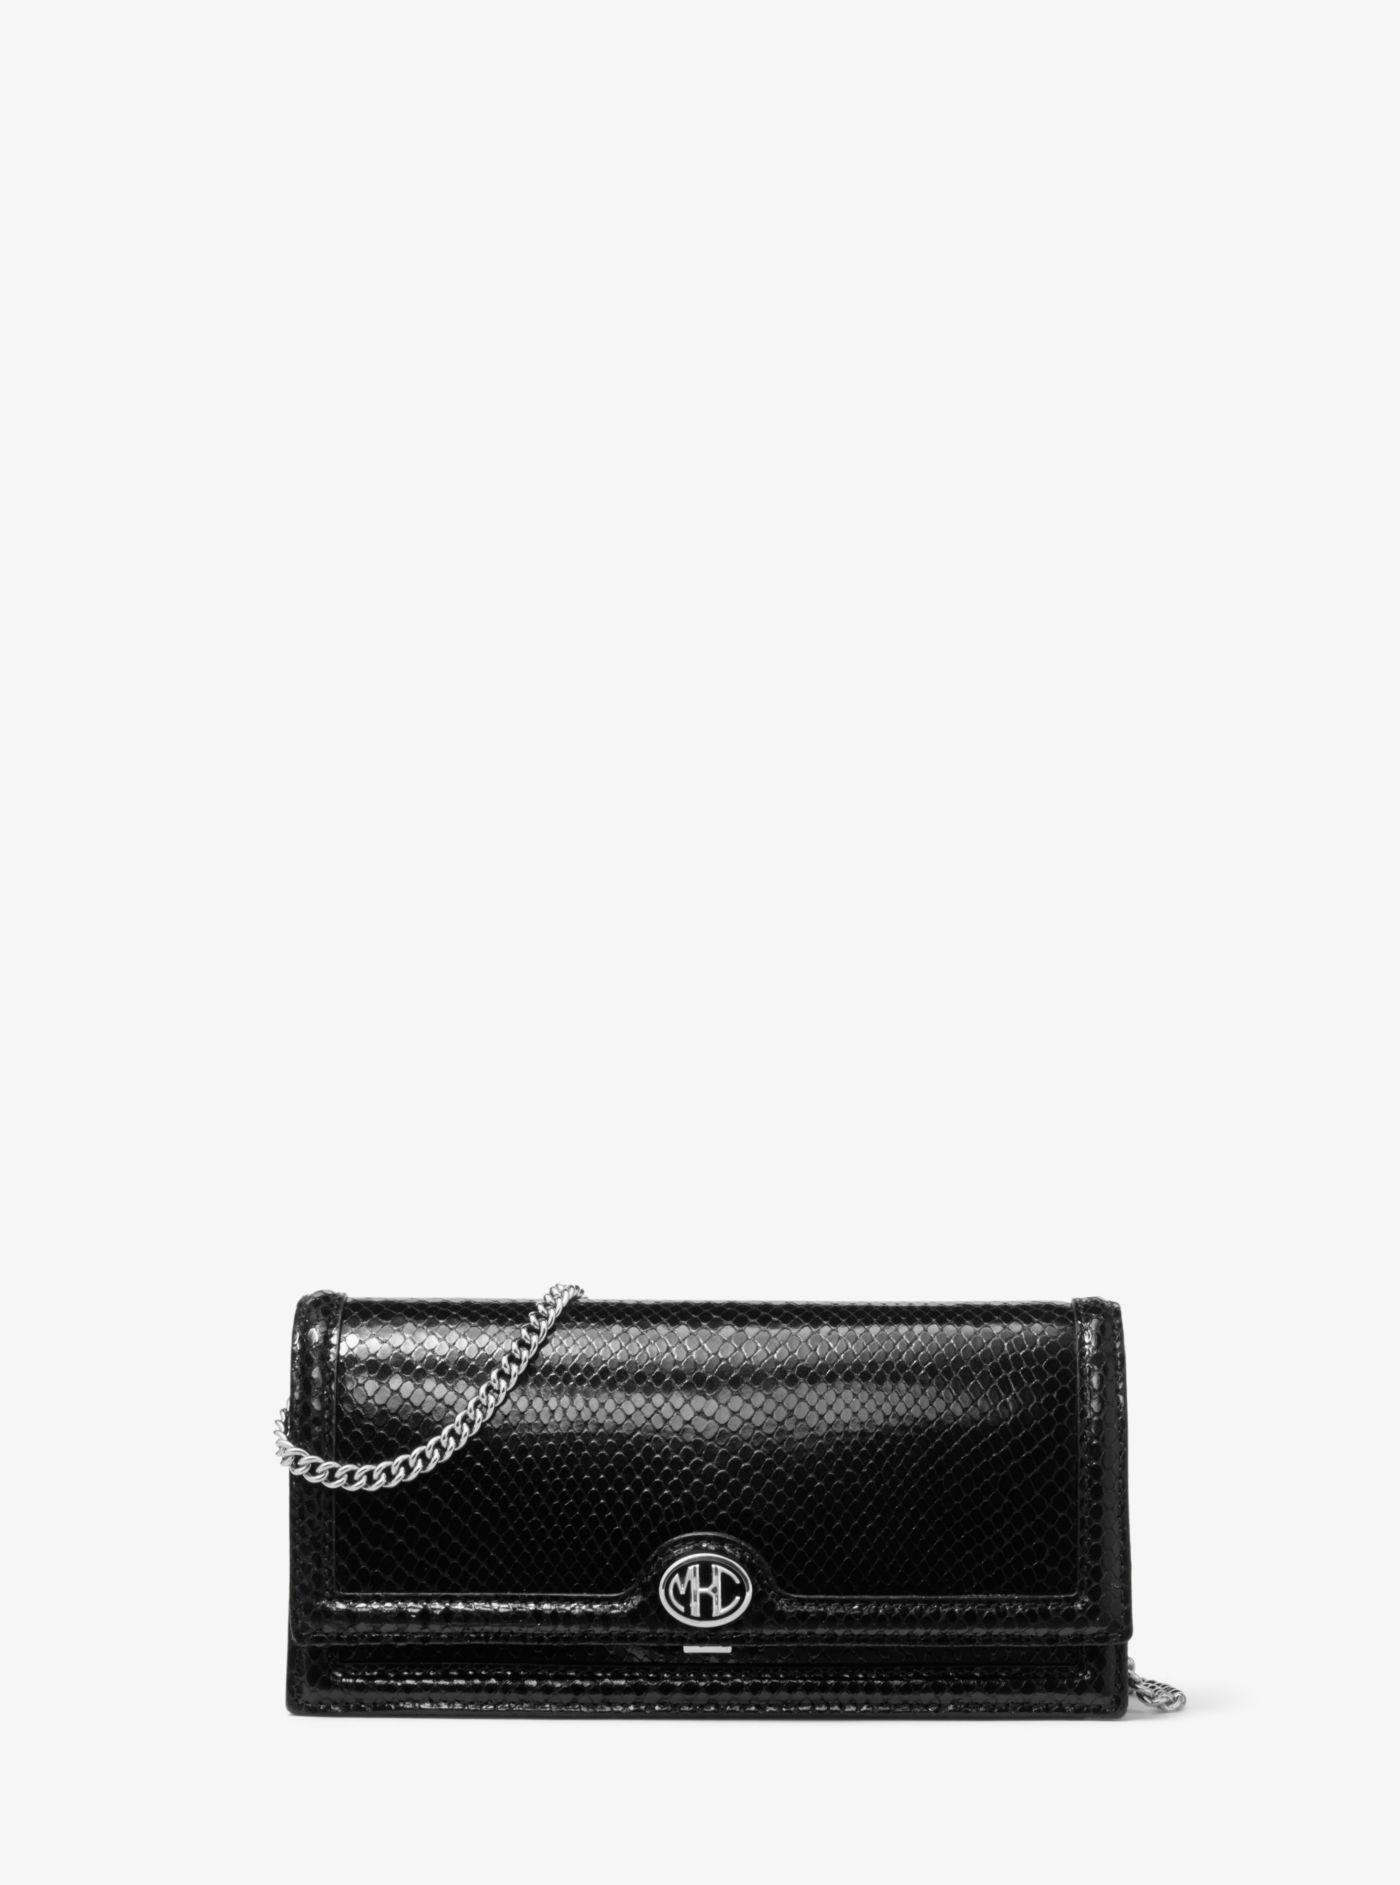 Michael Kors Monogramme Python Embossed Leather Clutch in Black - Lyst